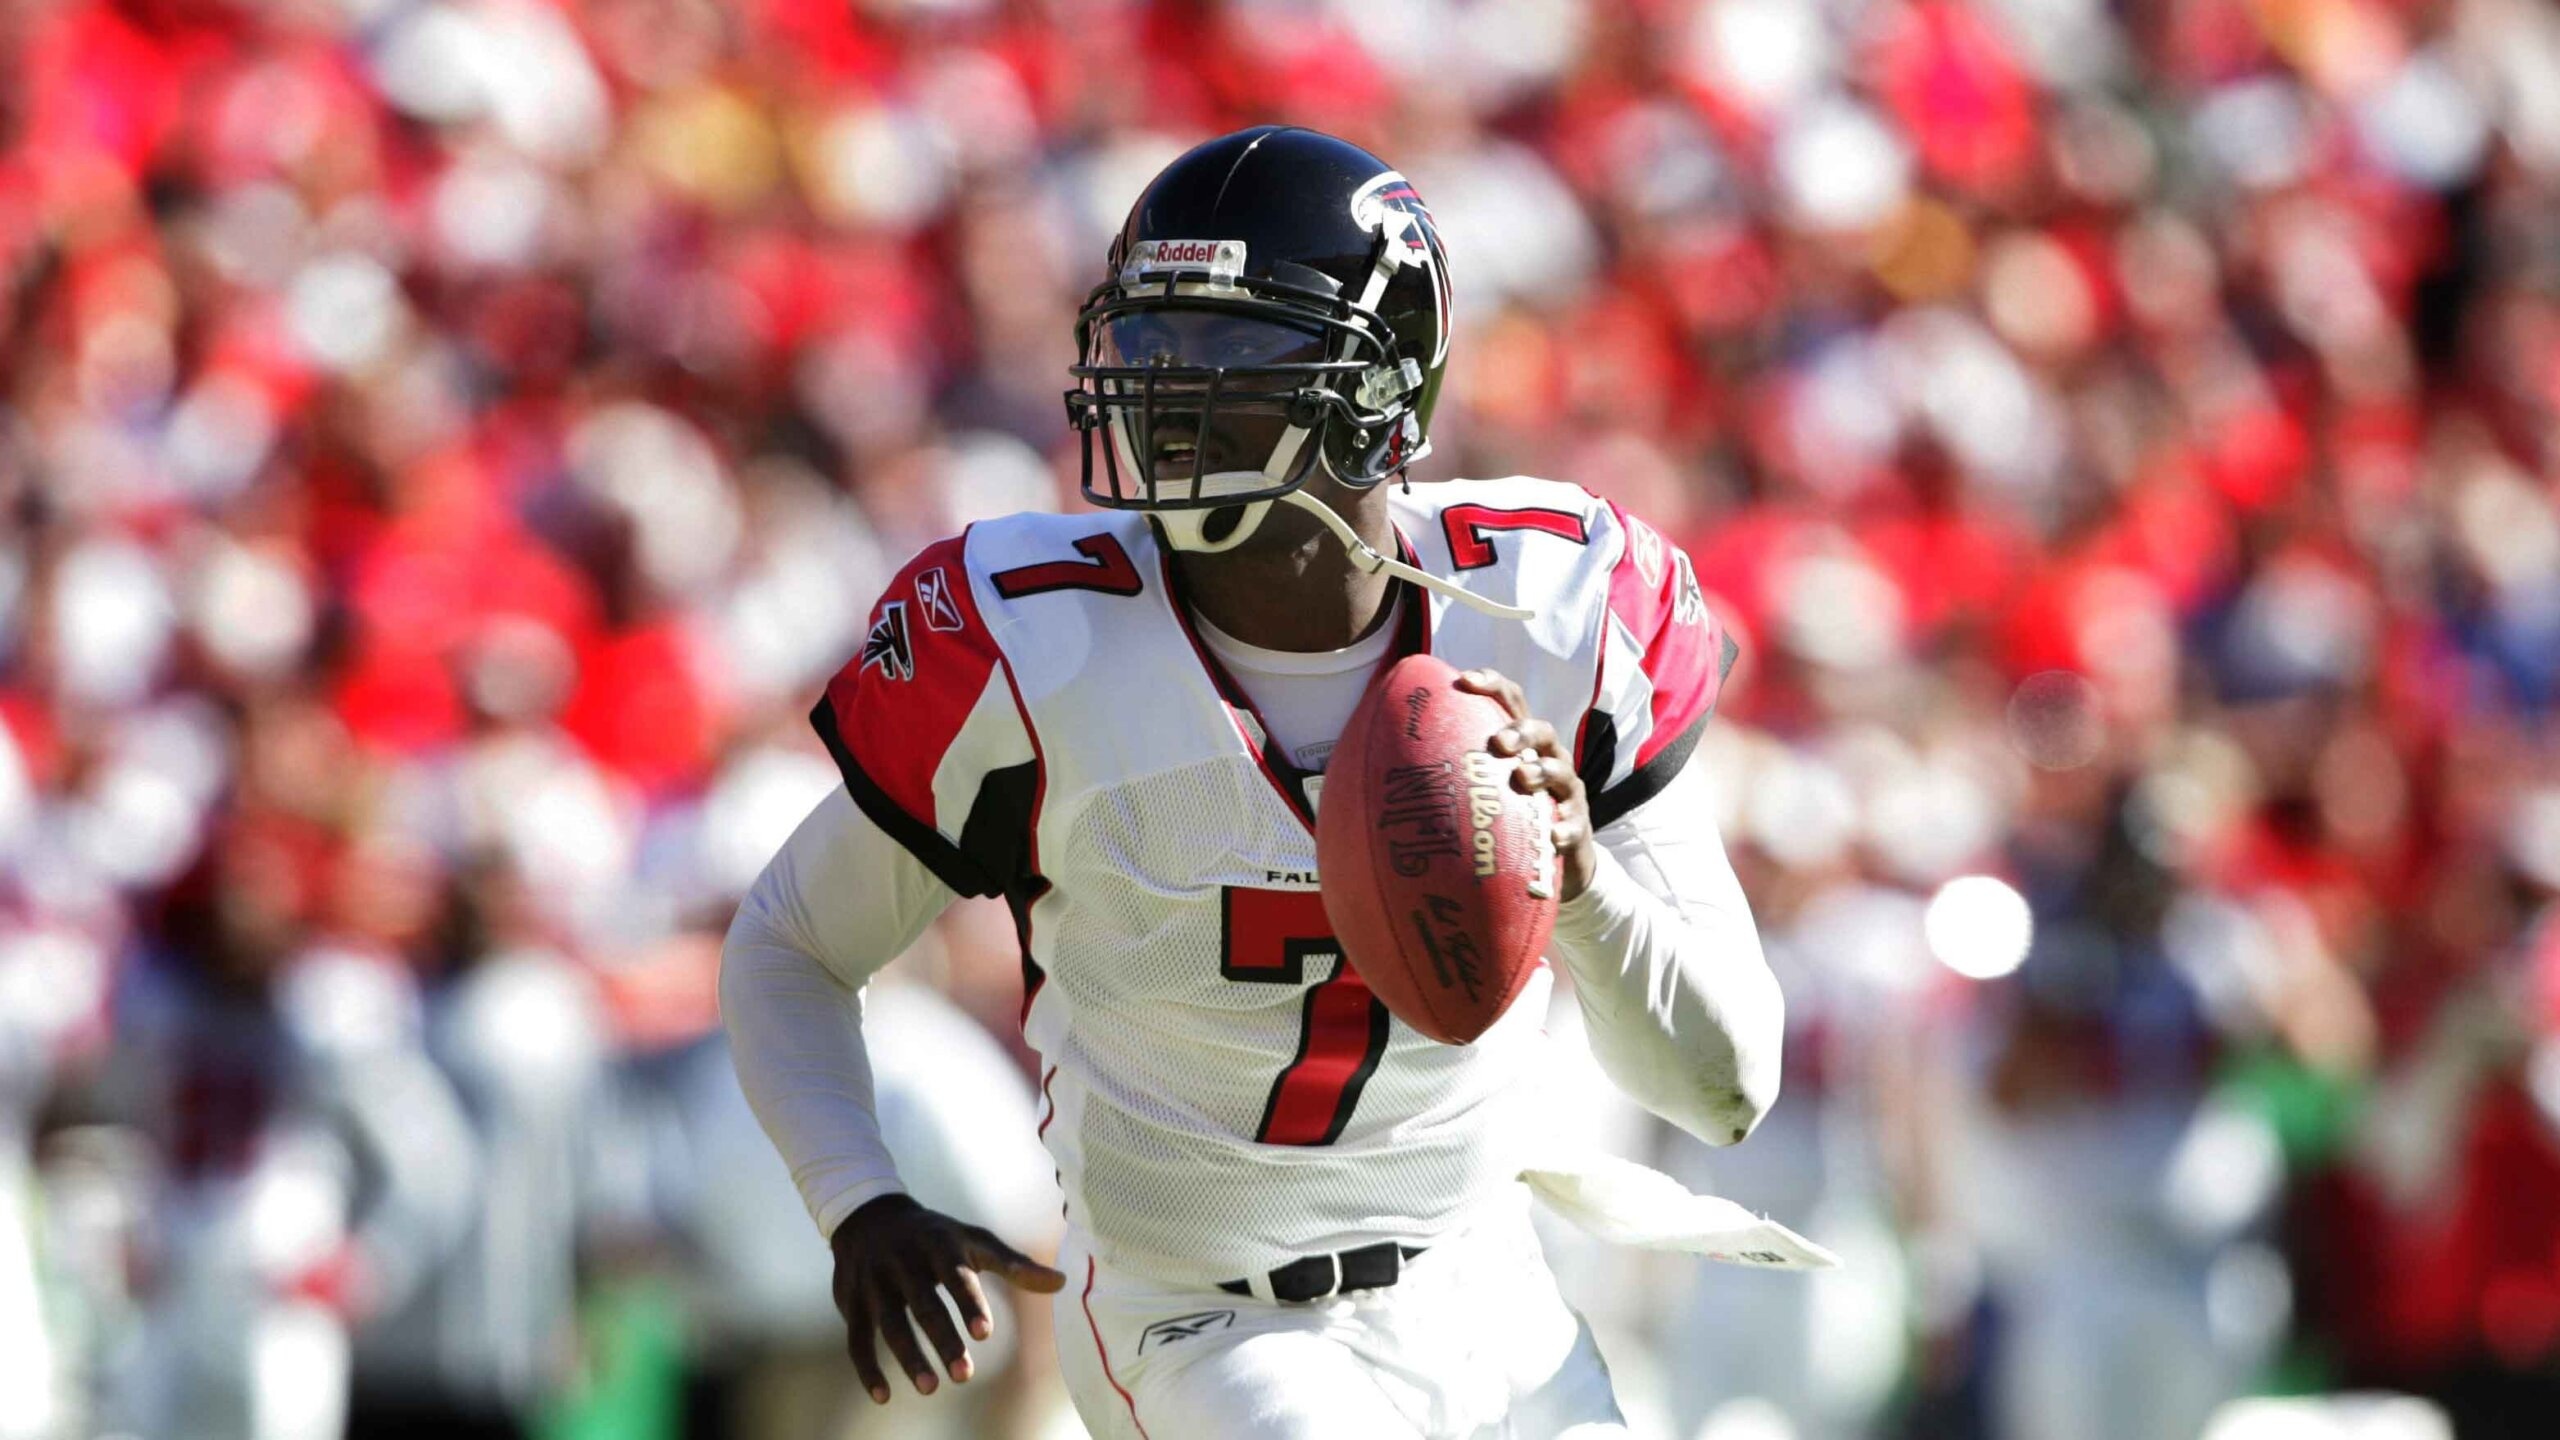 Michael Vick, Best nfl players, In the madden, Video game franchise, 2560x1440 HD Desktop